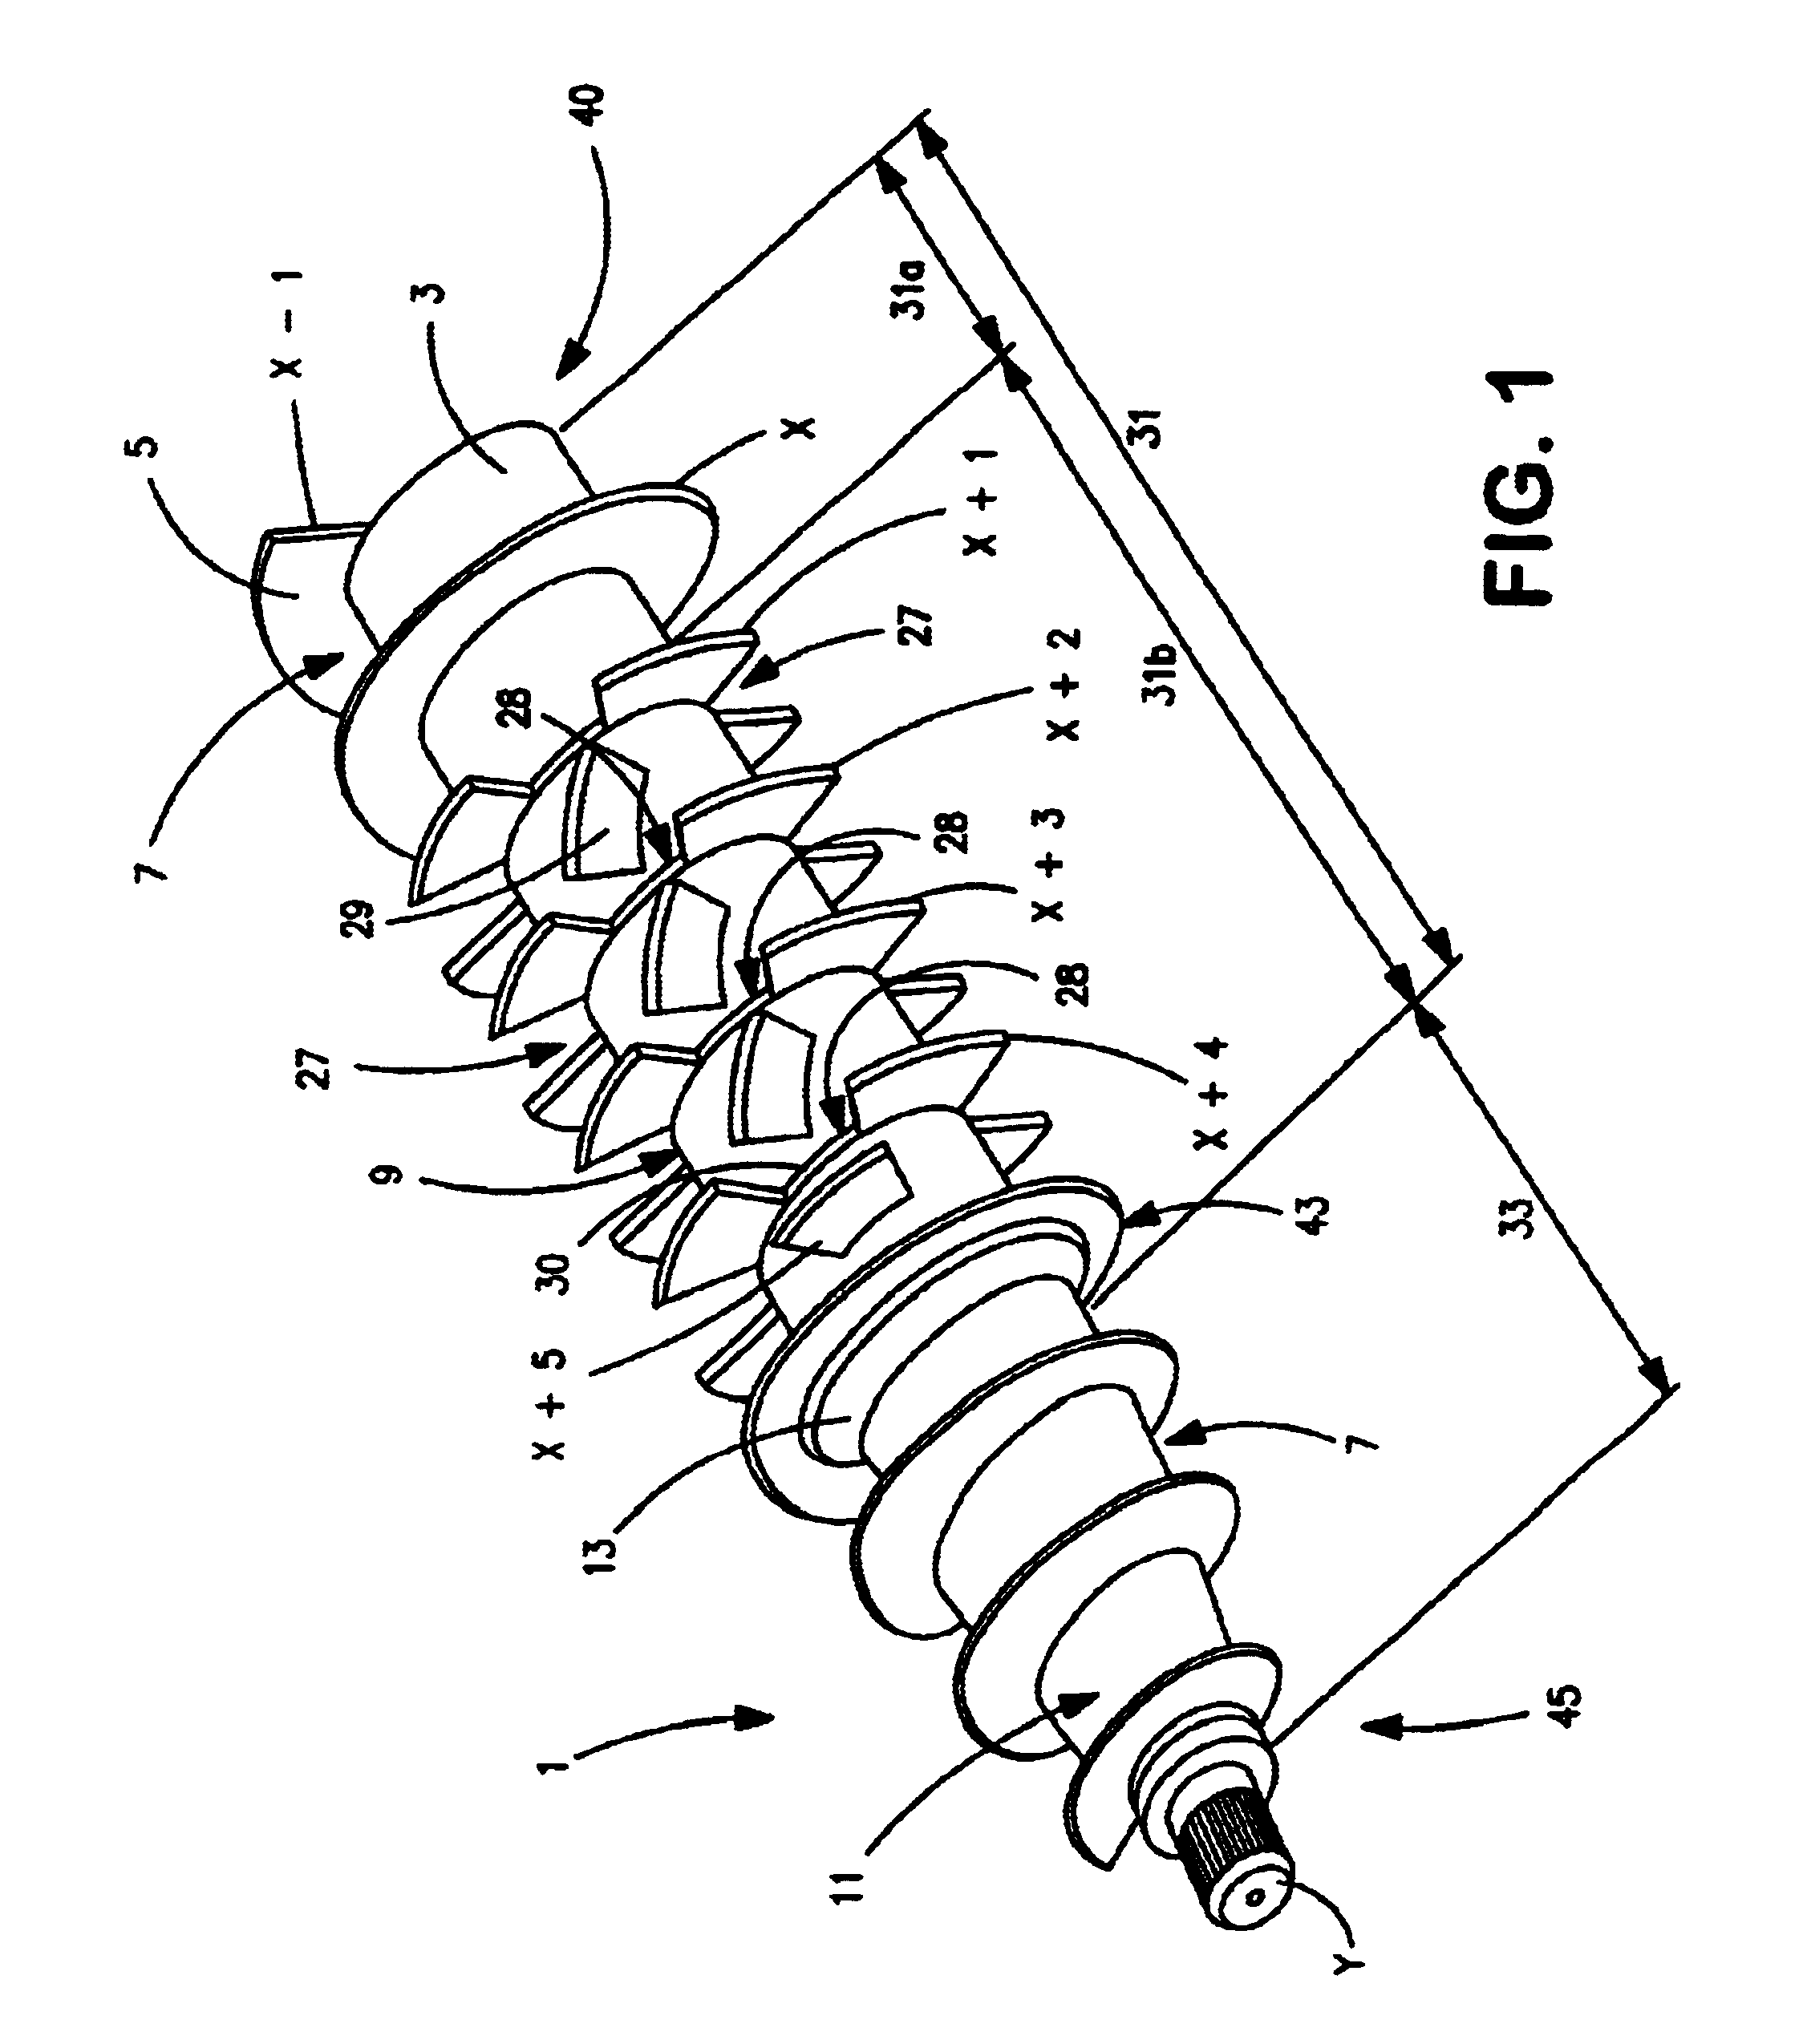 Screw for a solid-bowl centrifuge and a method of extracting oil using the centrifuge